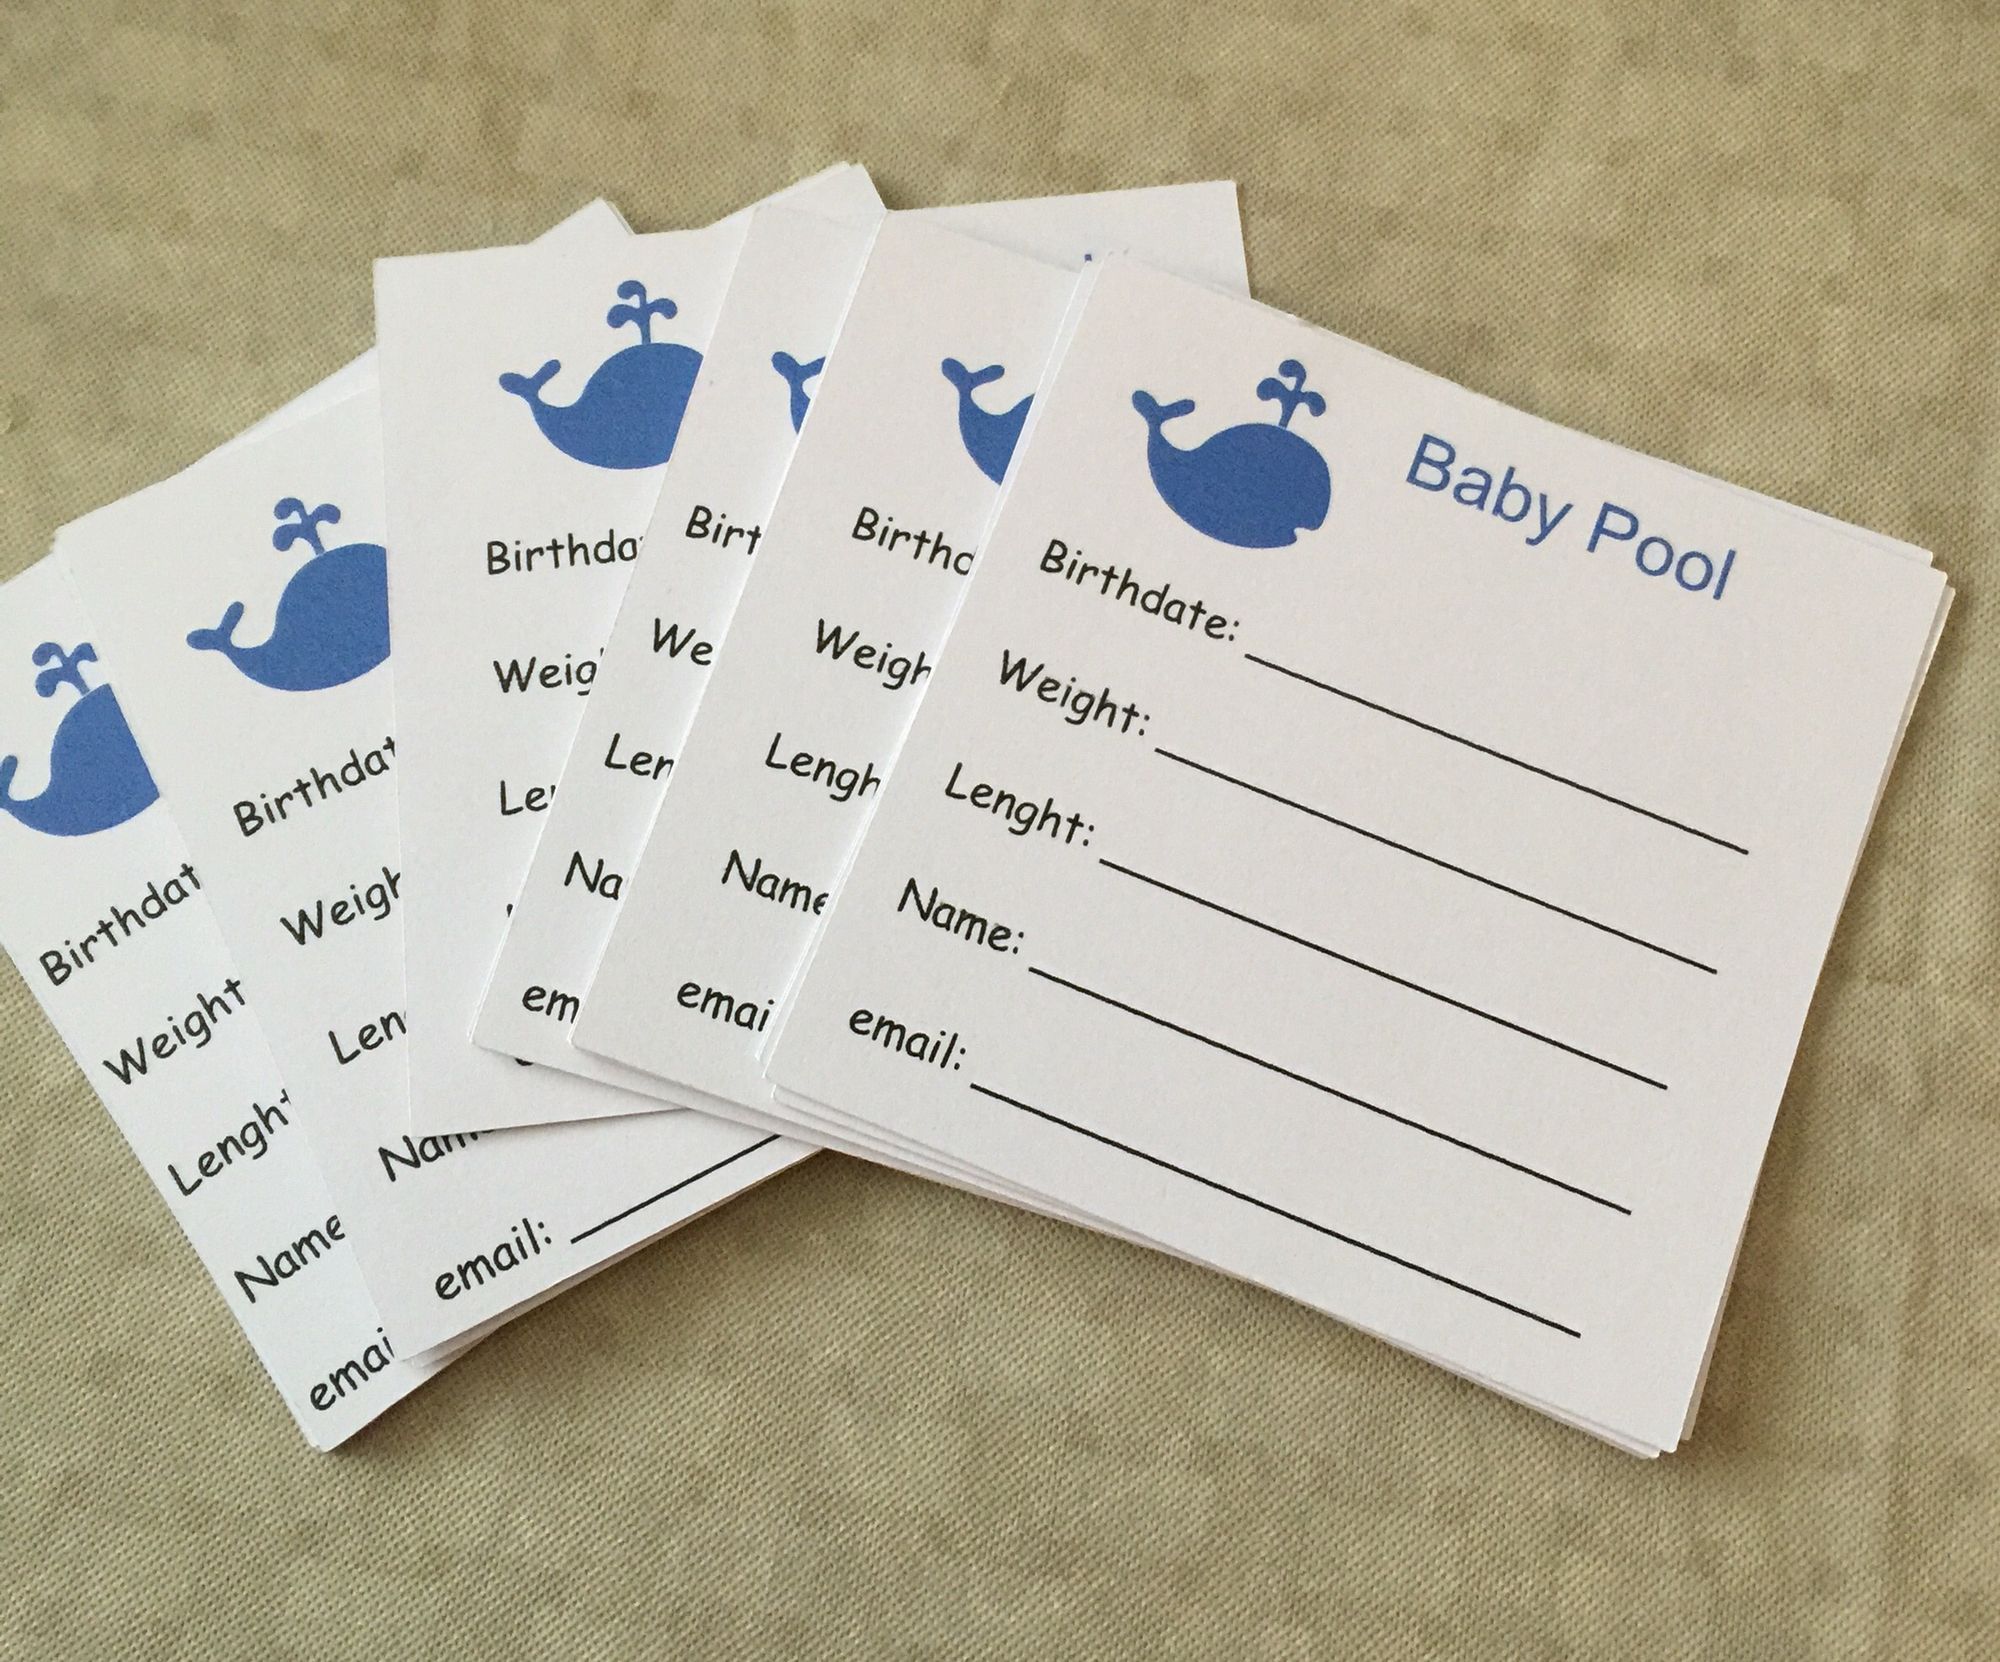 guess the date baby pool for baby shower 34